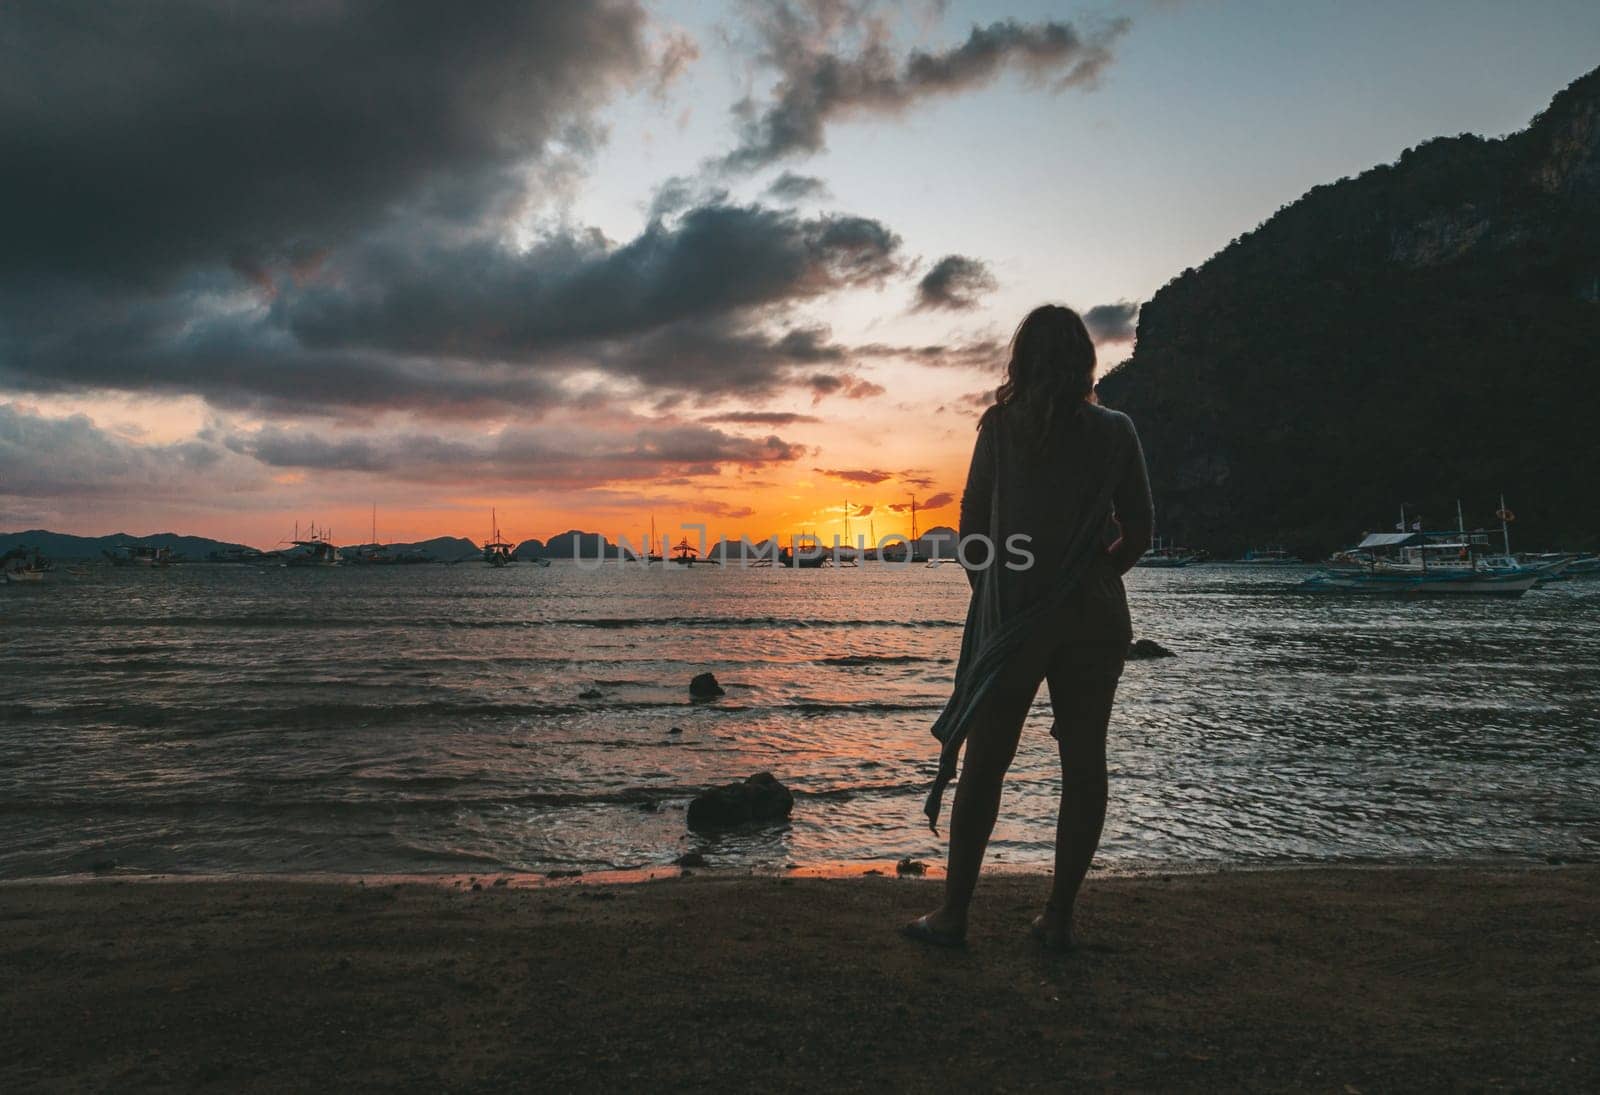 A woman stands on the beach in El Nido, Palawan, watching a stunning sunset over the calm ocean waters, with boats in the distance.